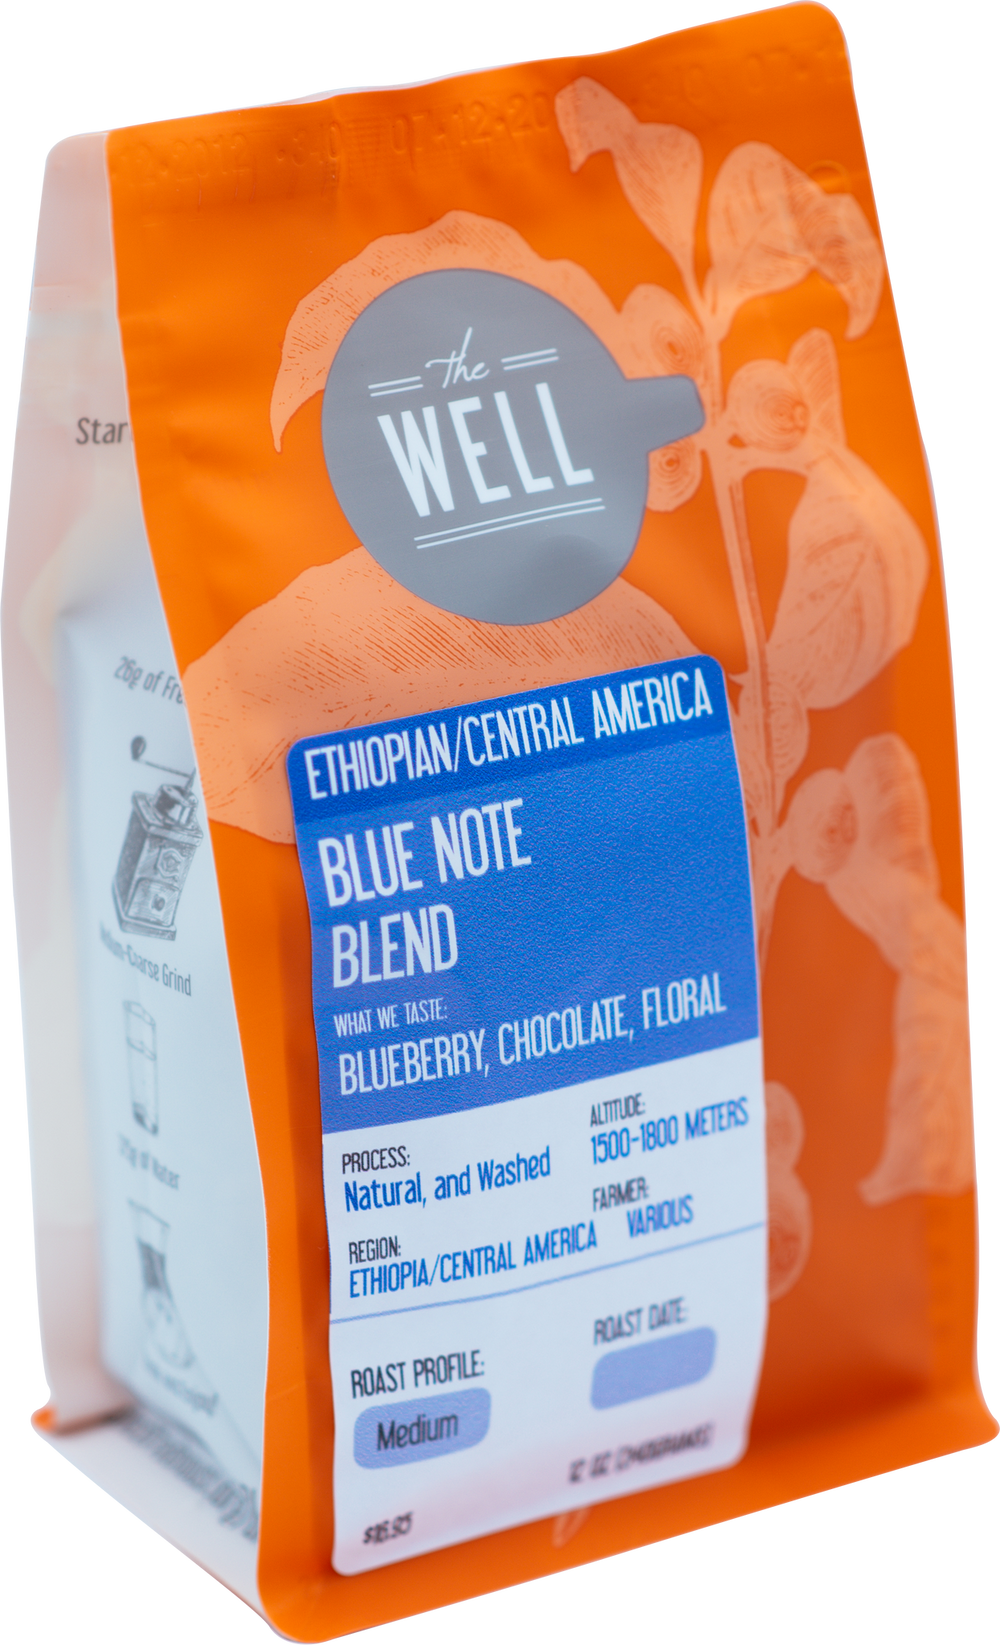 a bag of blue note blend coffee from Ethiopia and Central America